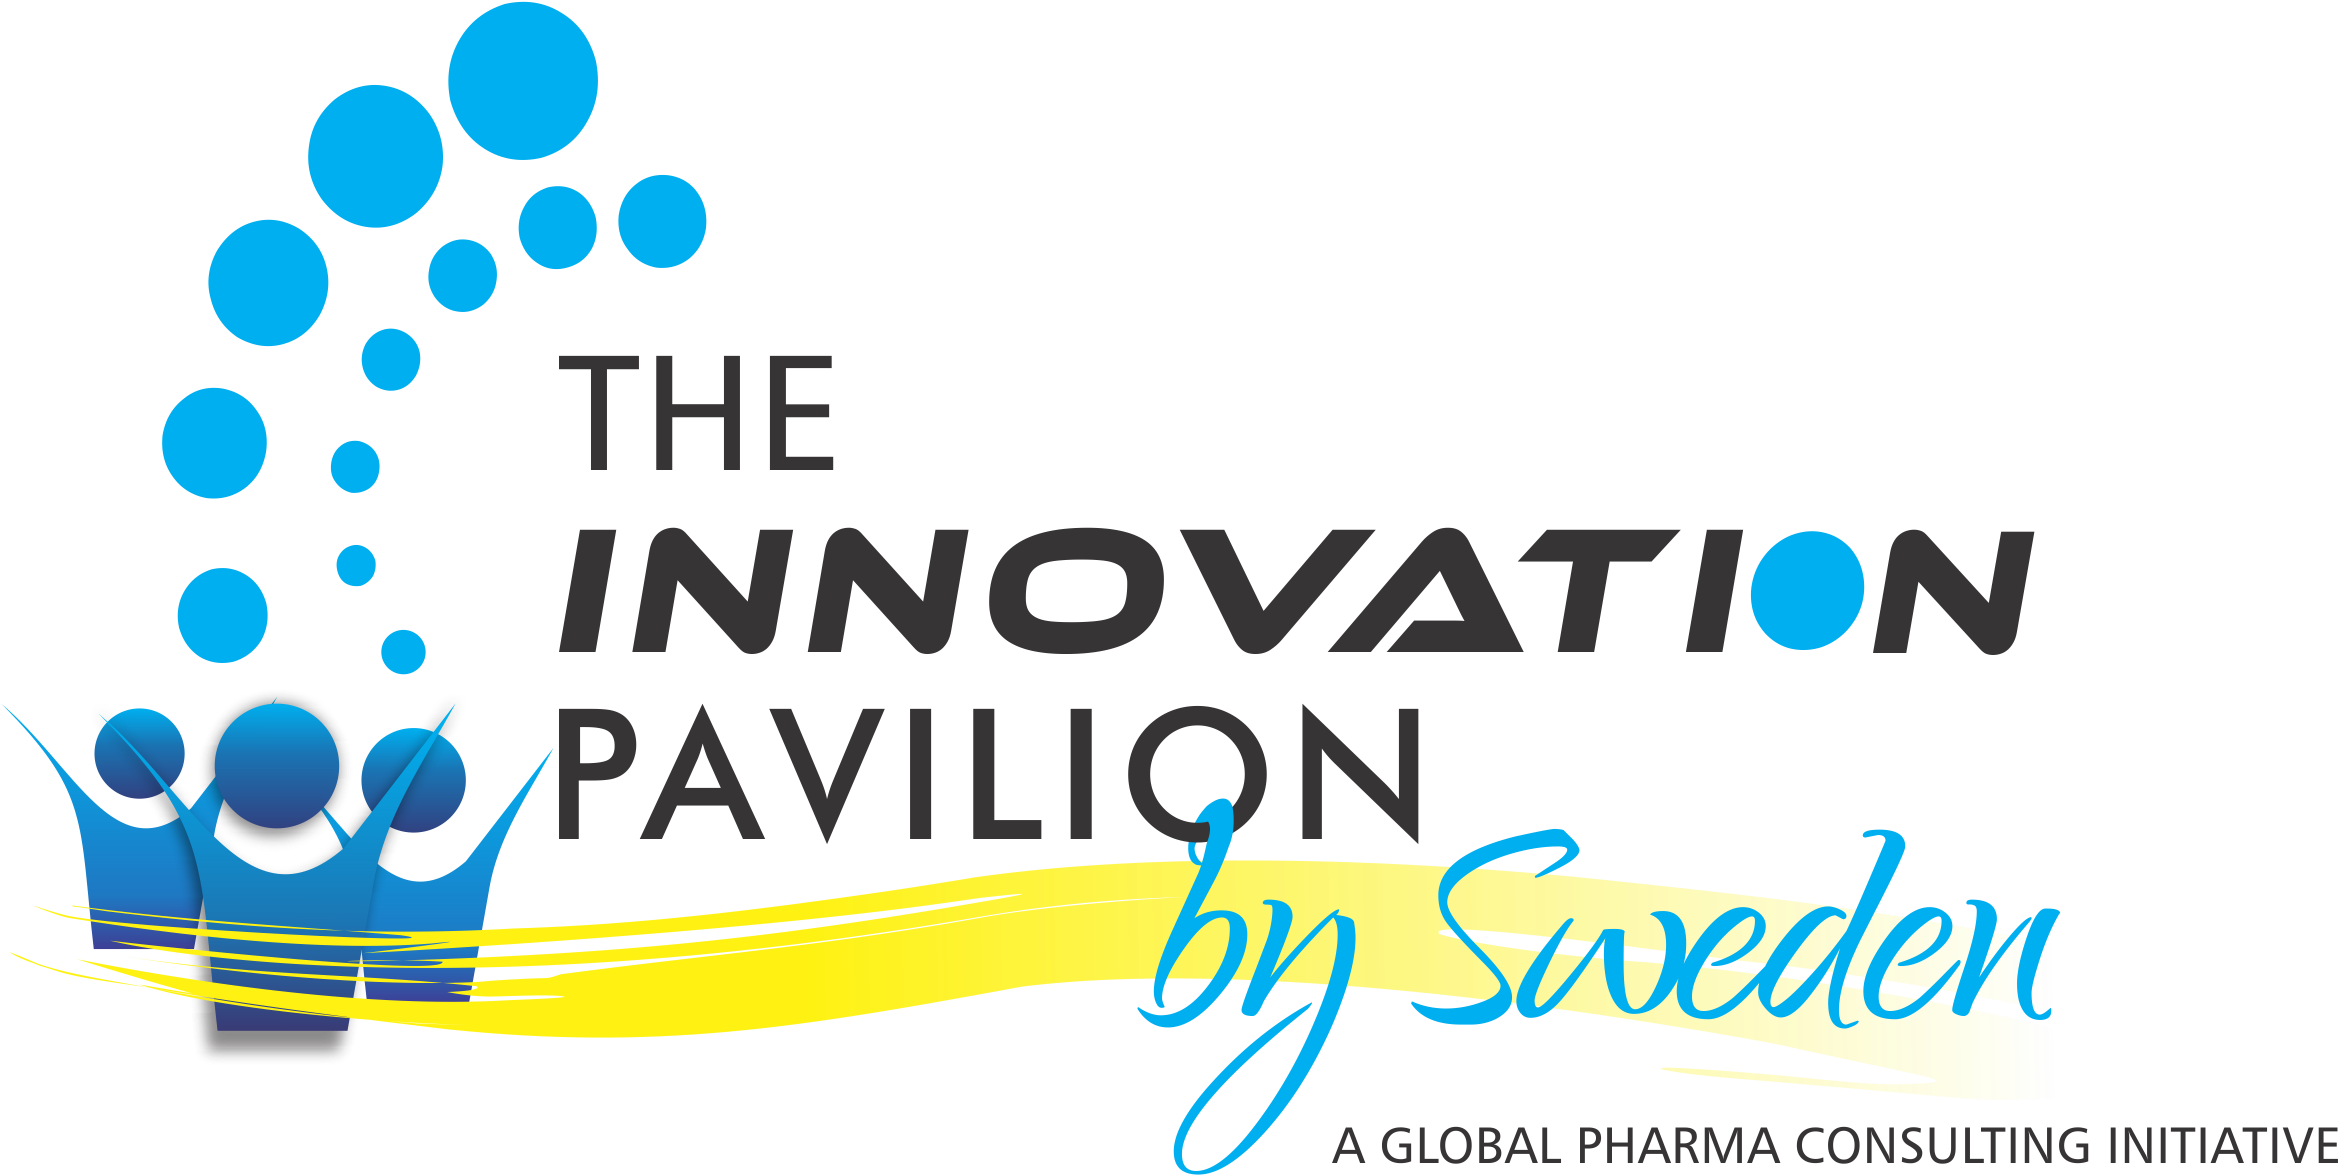 The Innovation Pavilion By Sweden - Global Pharma Consulting (2507x1174)